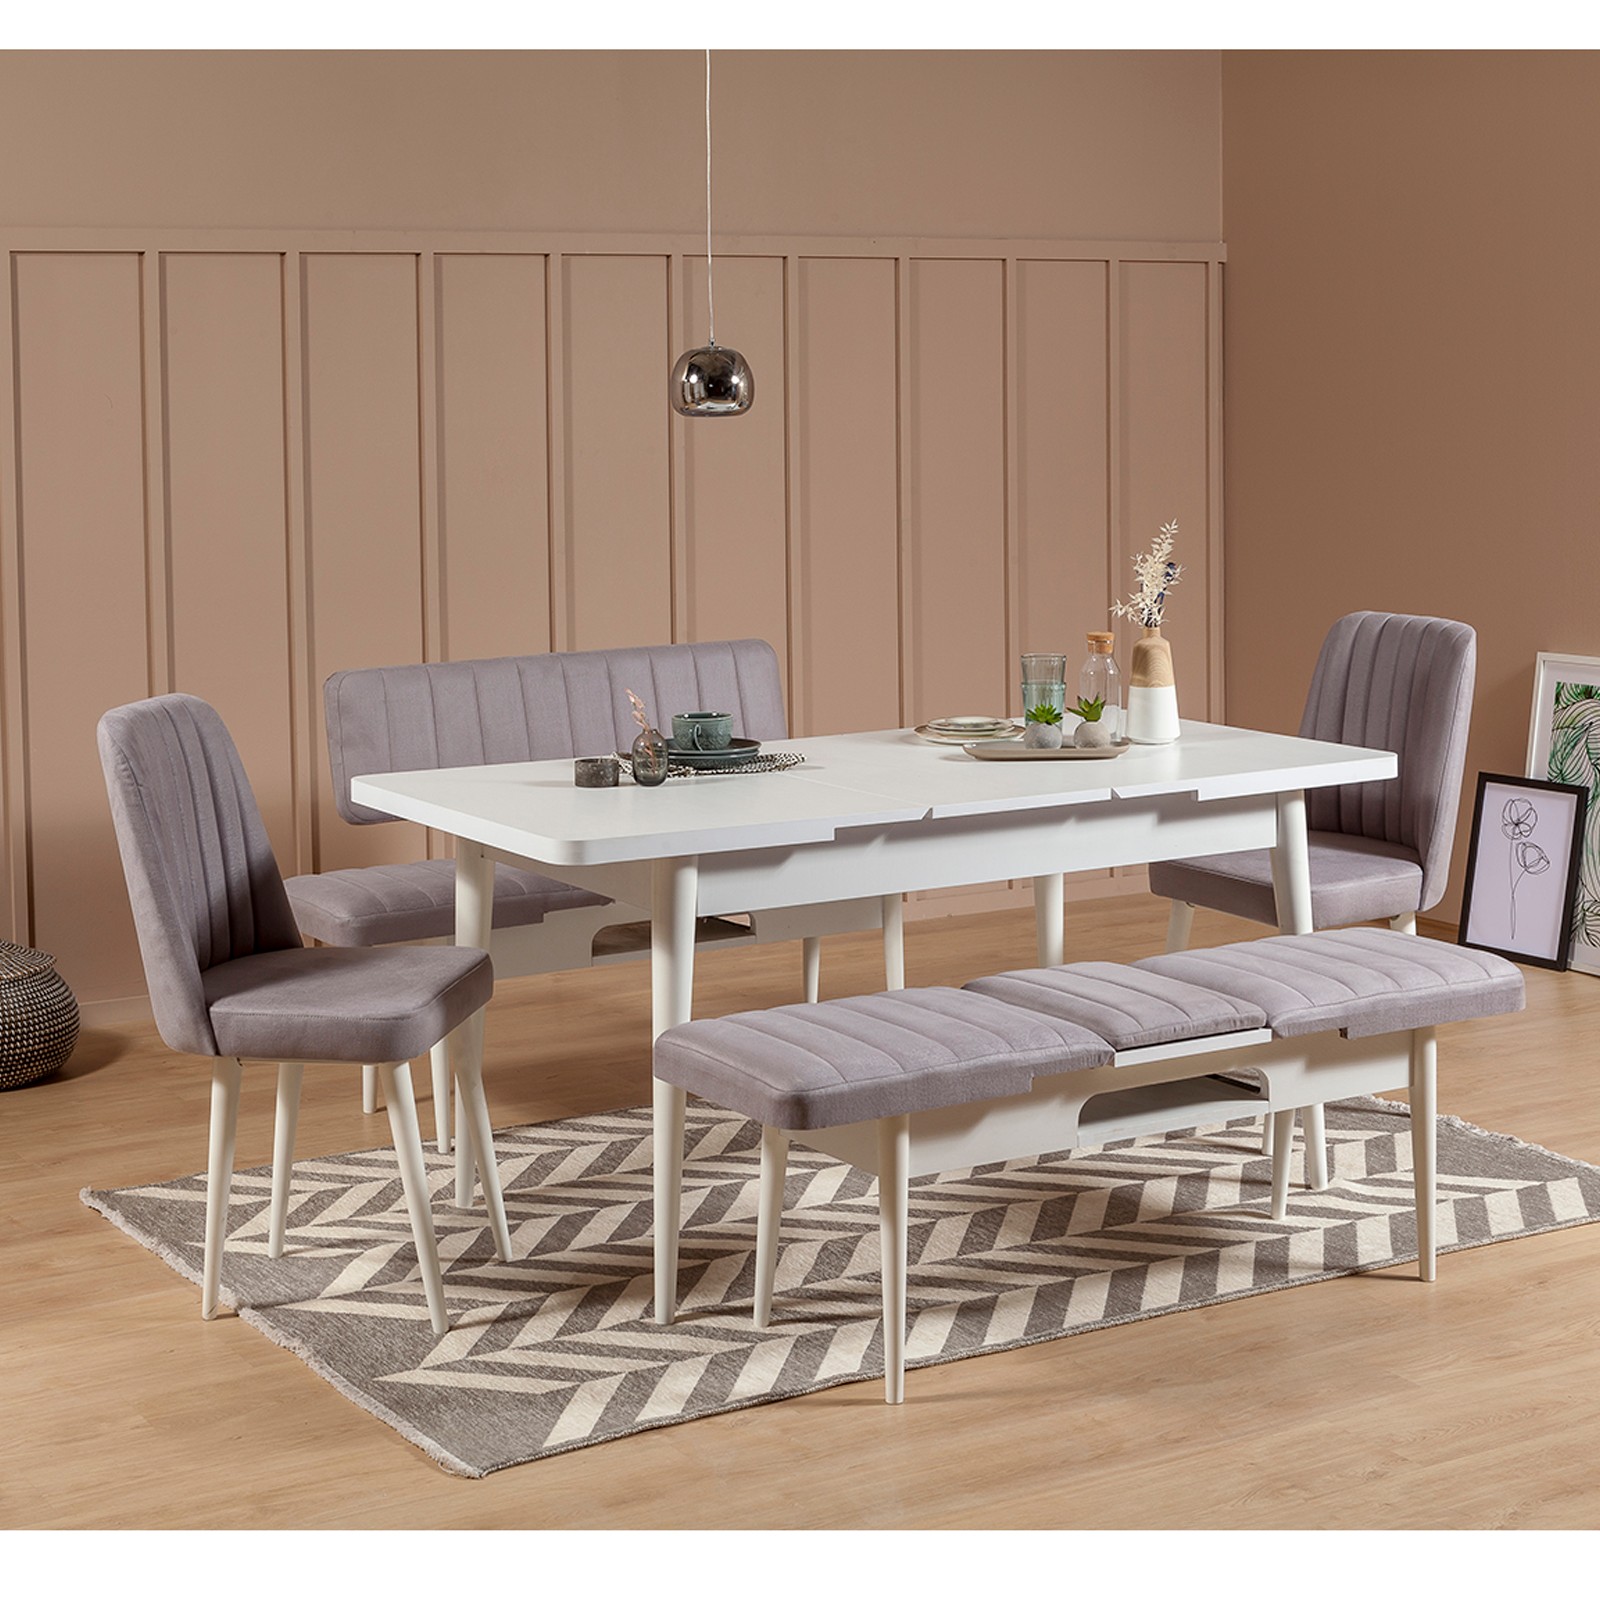 Malva 5-piece Extendable Table and Chair Set White and Lead Grey Melamine Panel